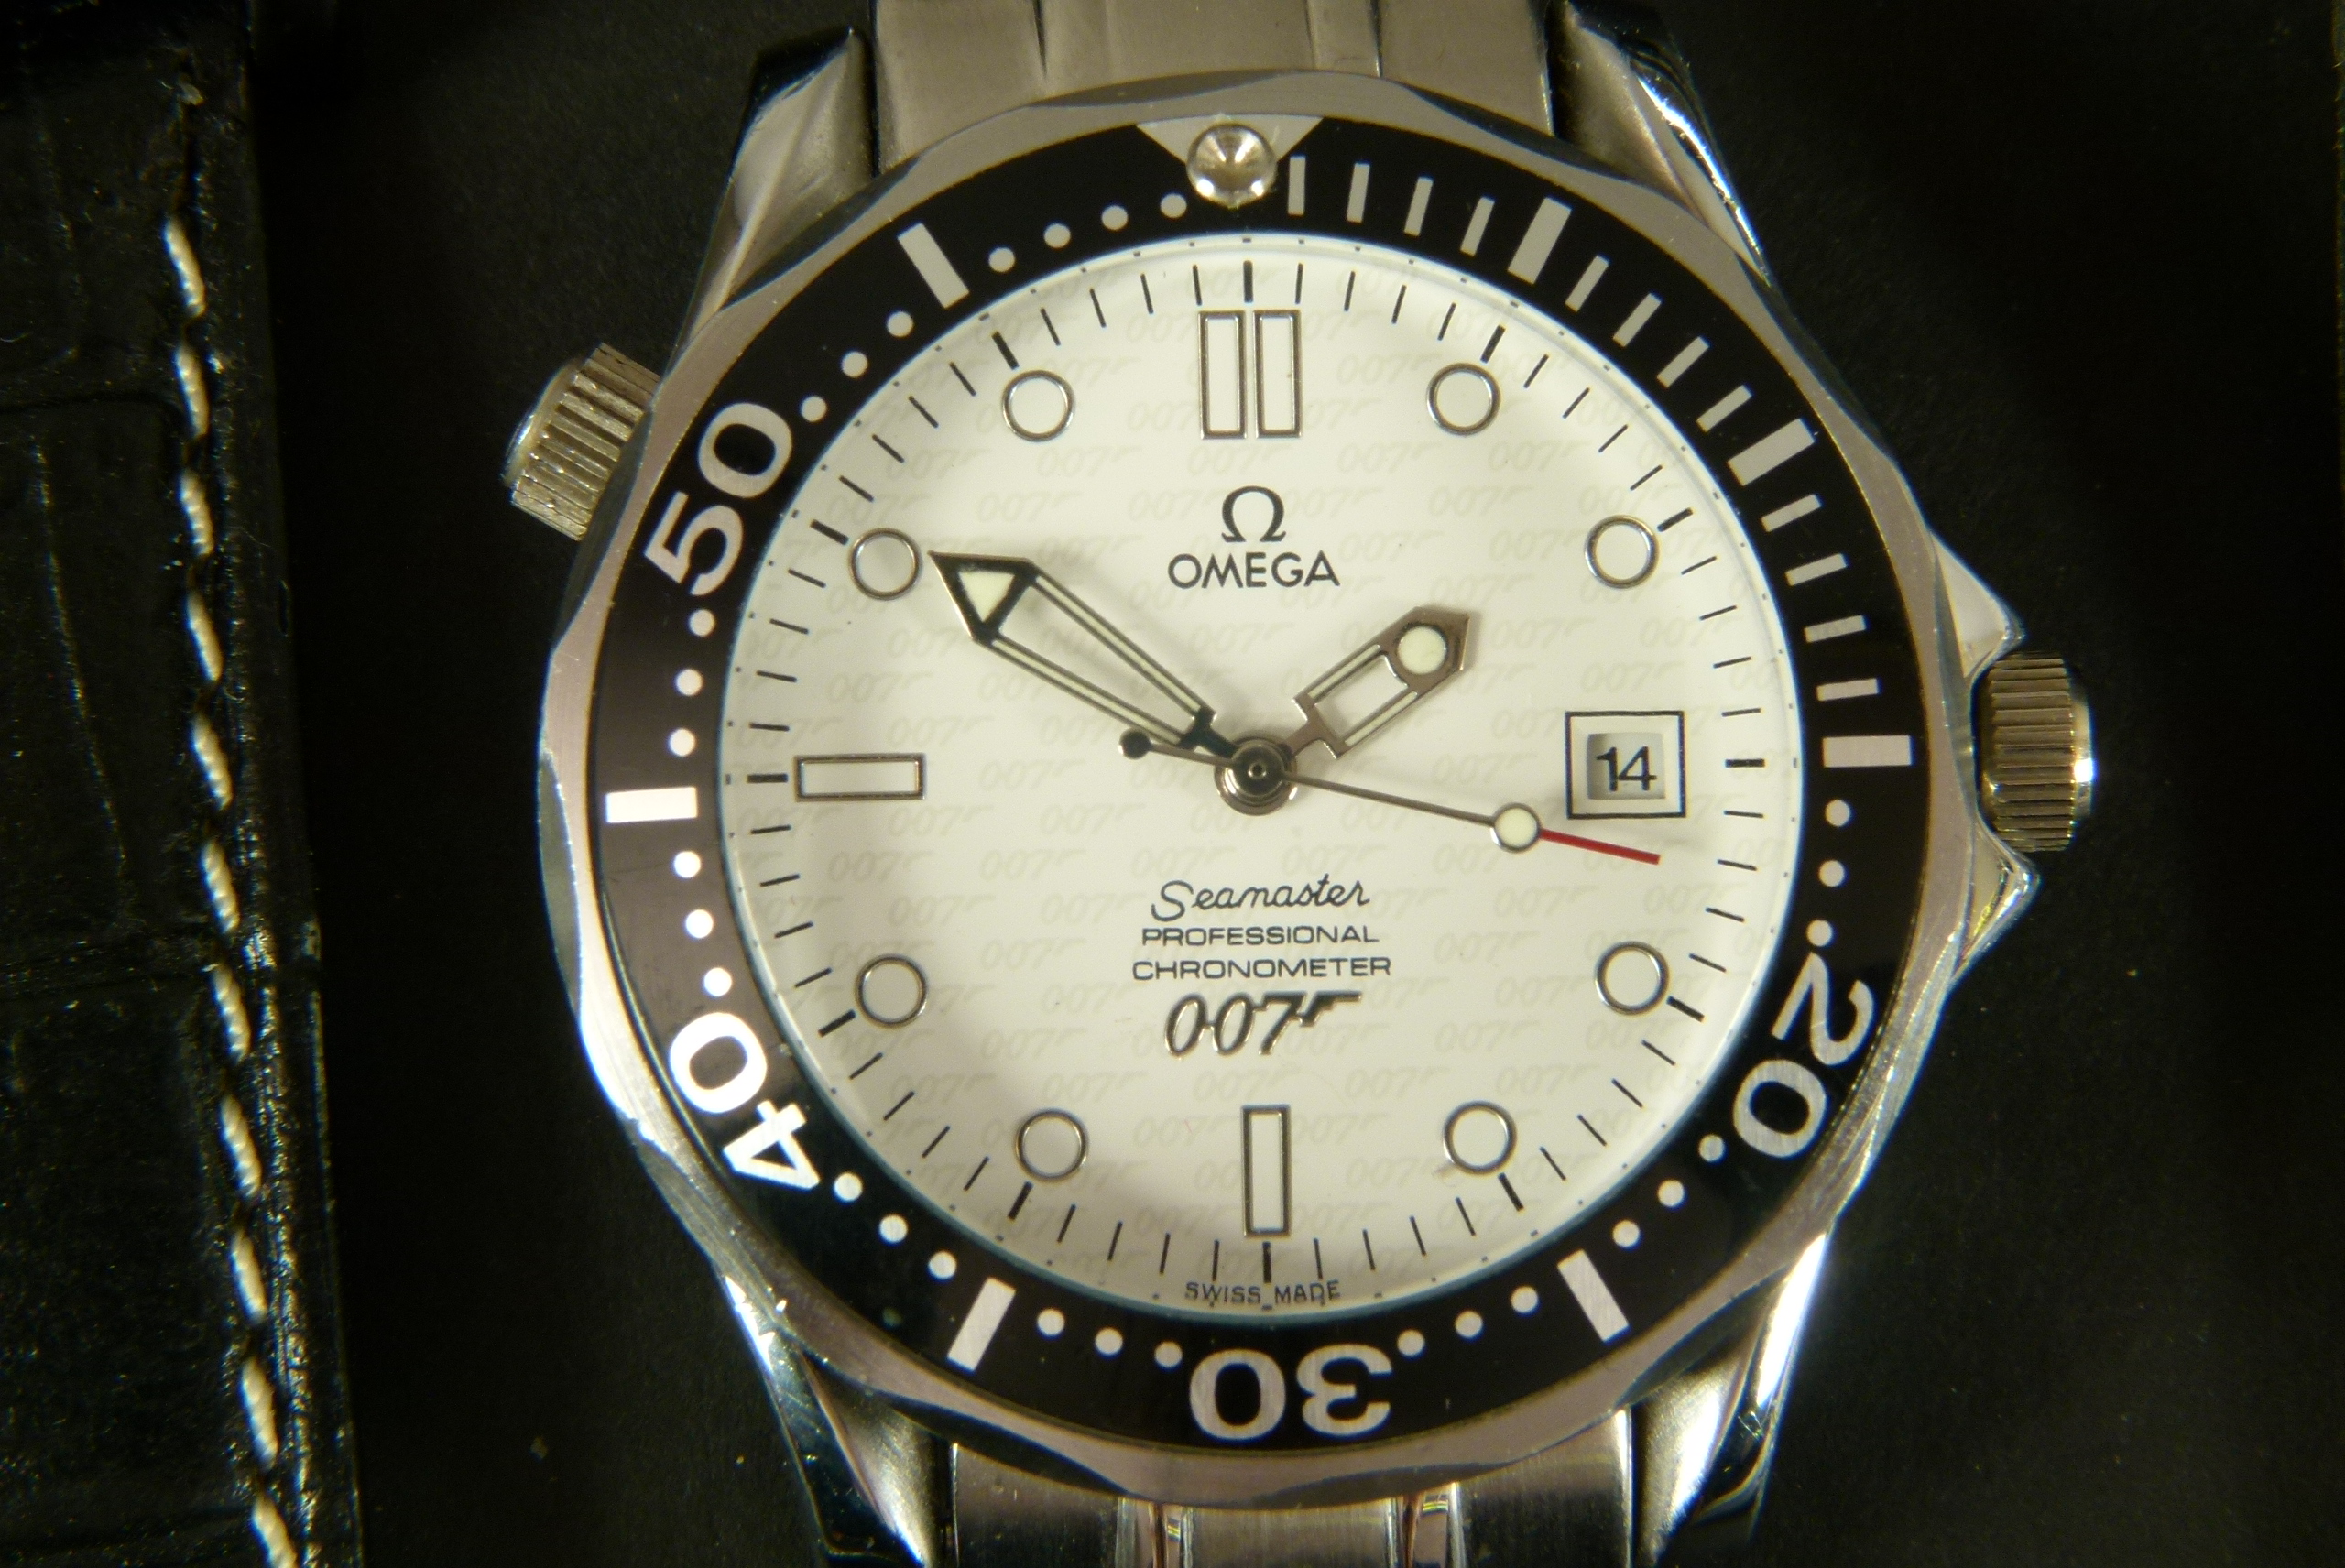 A fake Omega gentleman's date wristwatch in white base metal case and bracelet with white dial, - Image 2 of 3